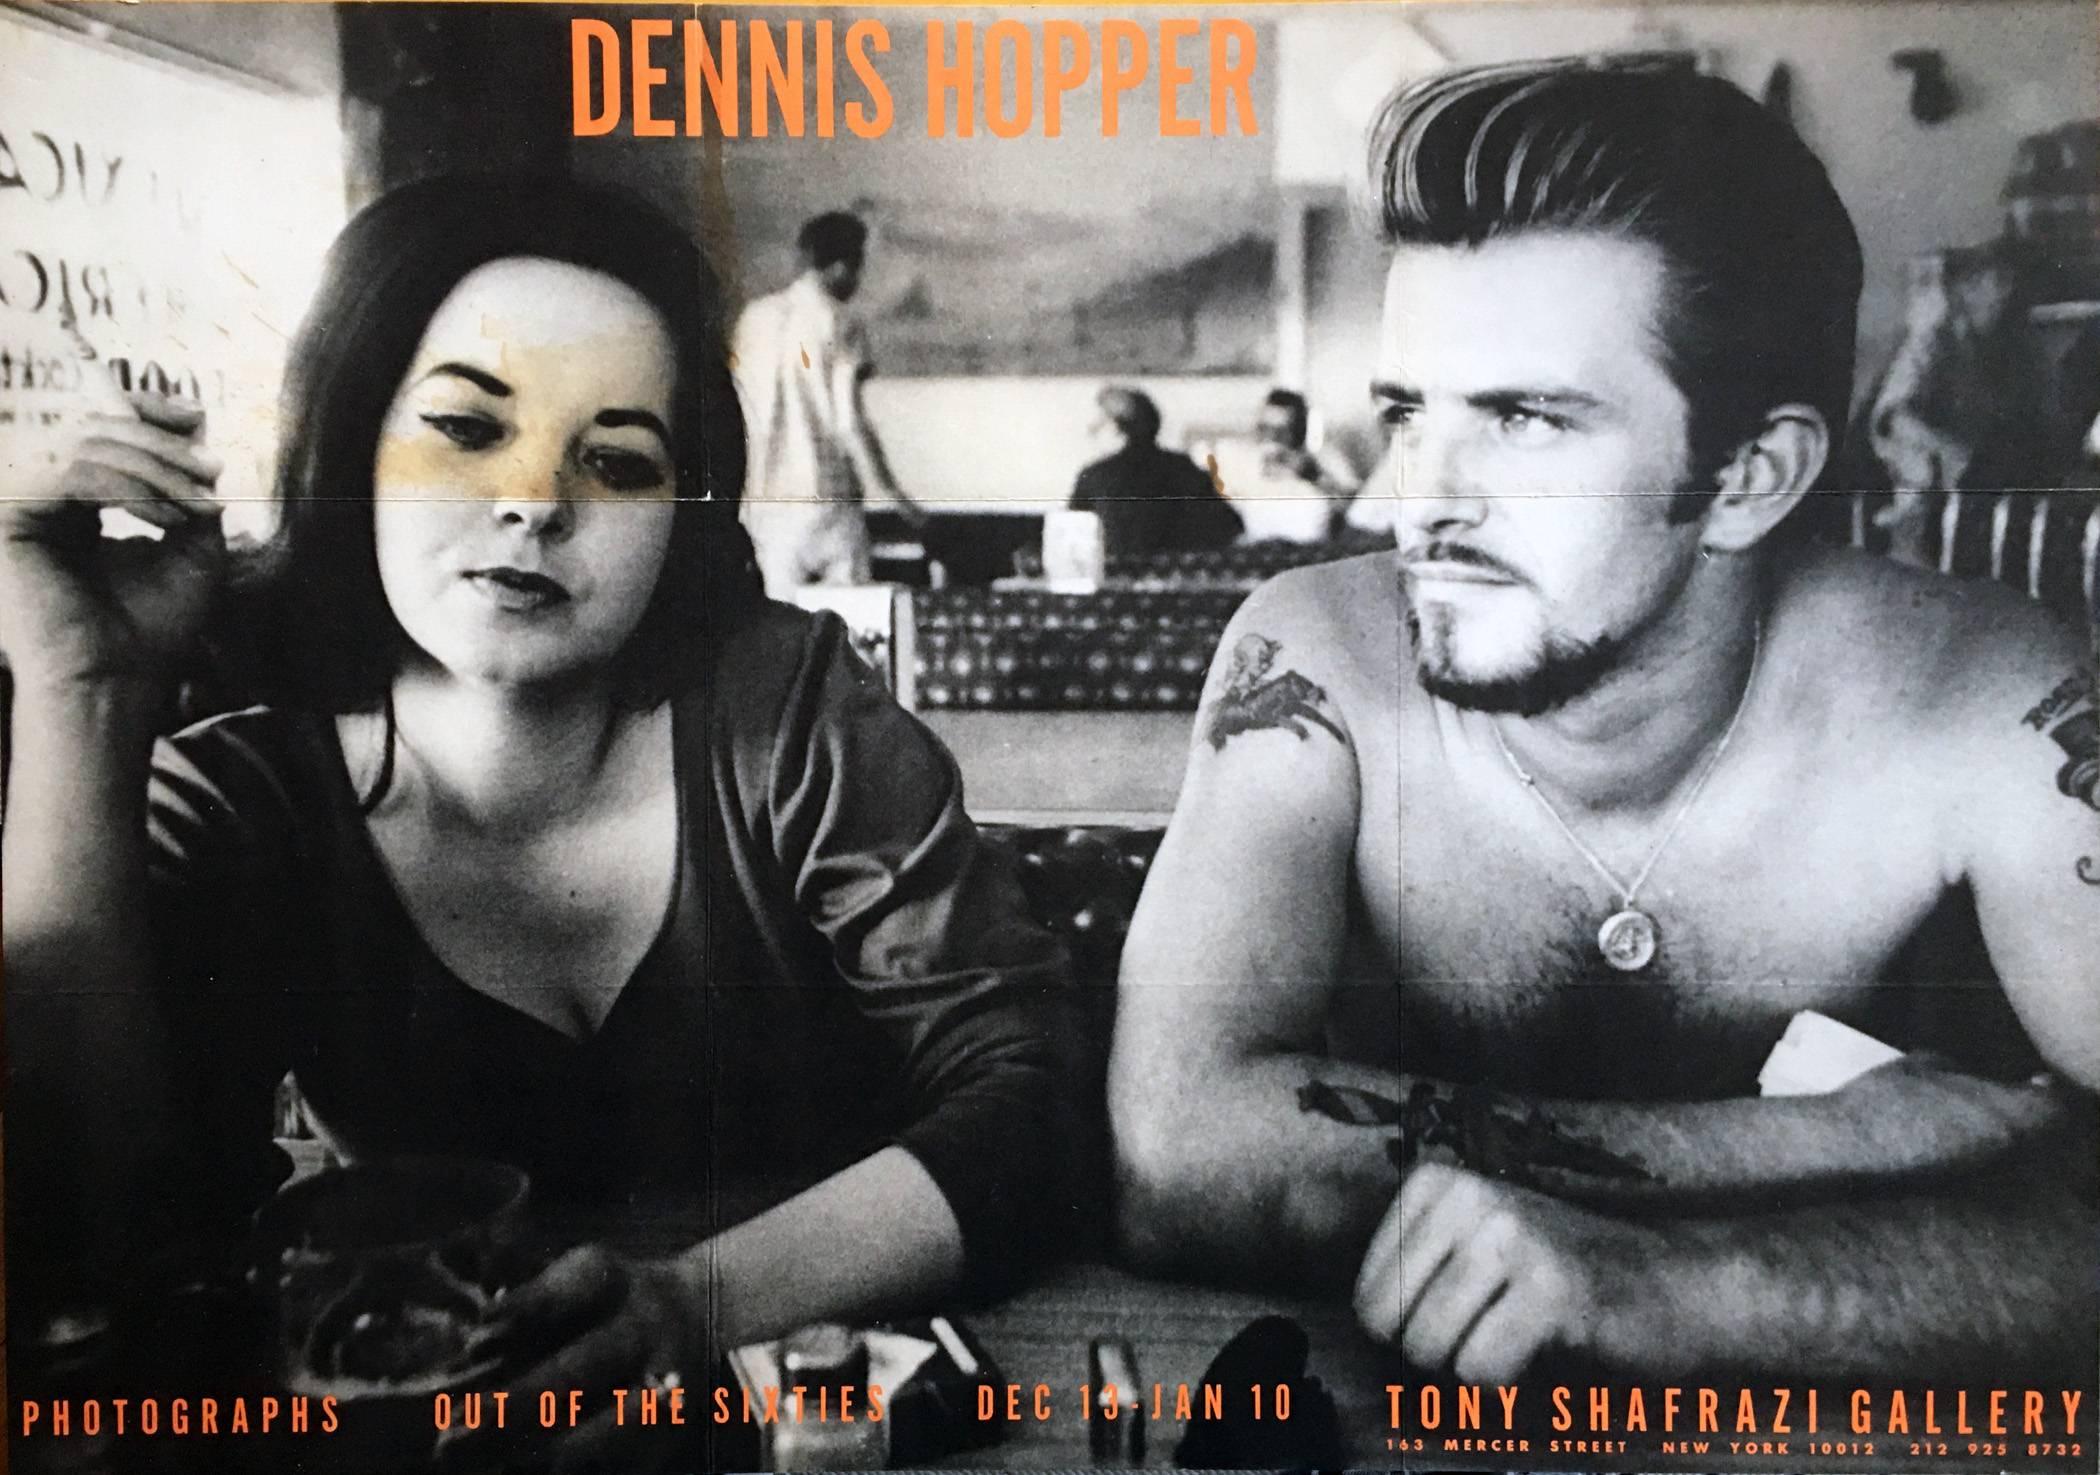 Dennis Hopper Print - Out Of The Sixties Exhibit Poster, Tony Shafrazi Gallery, New York 